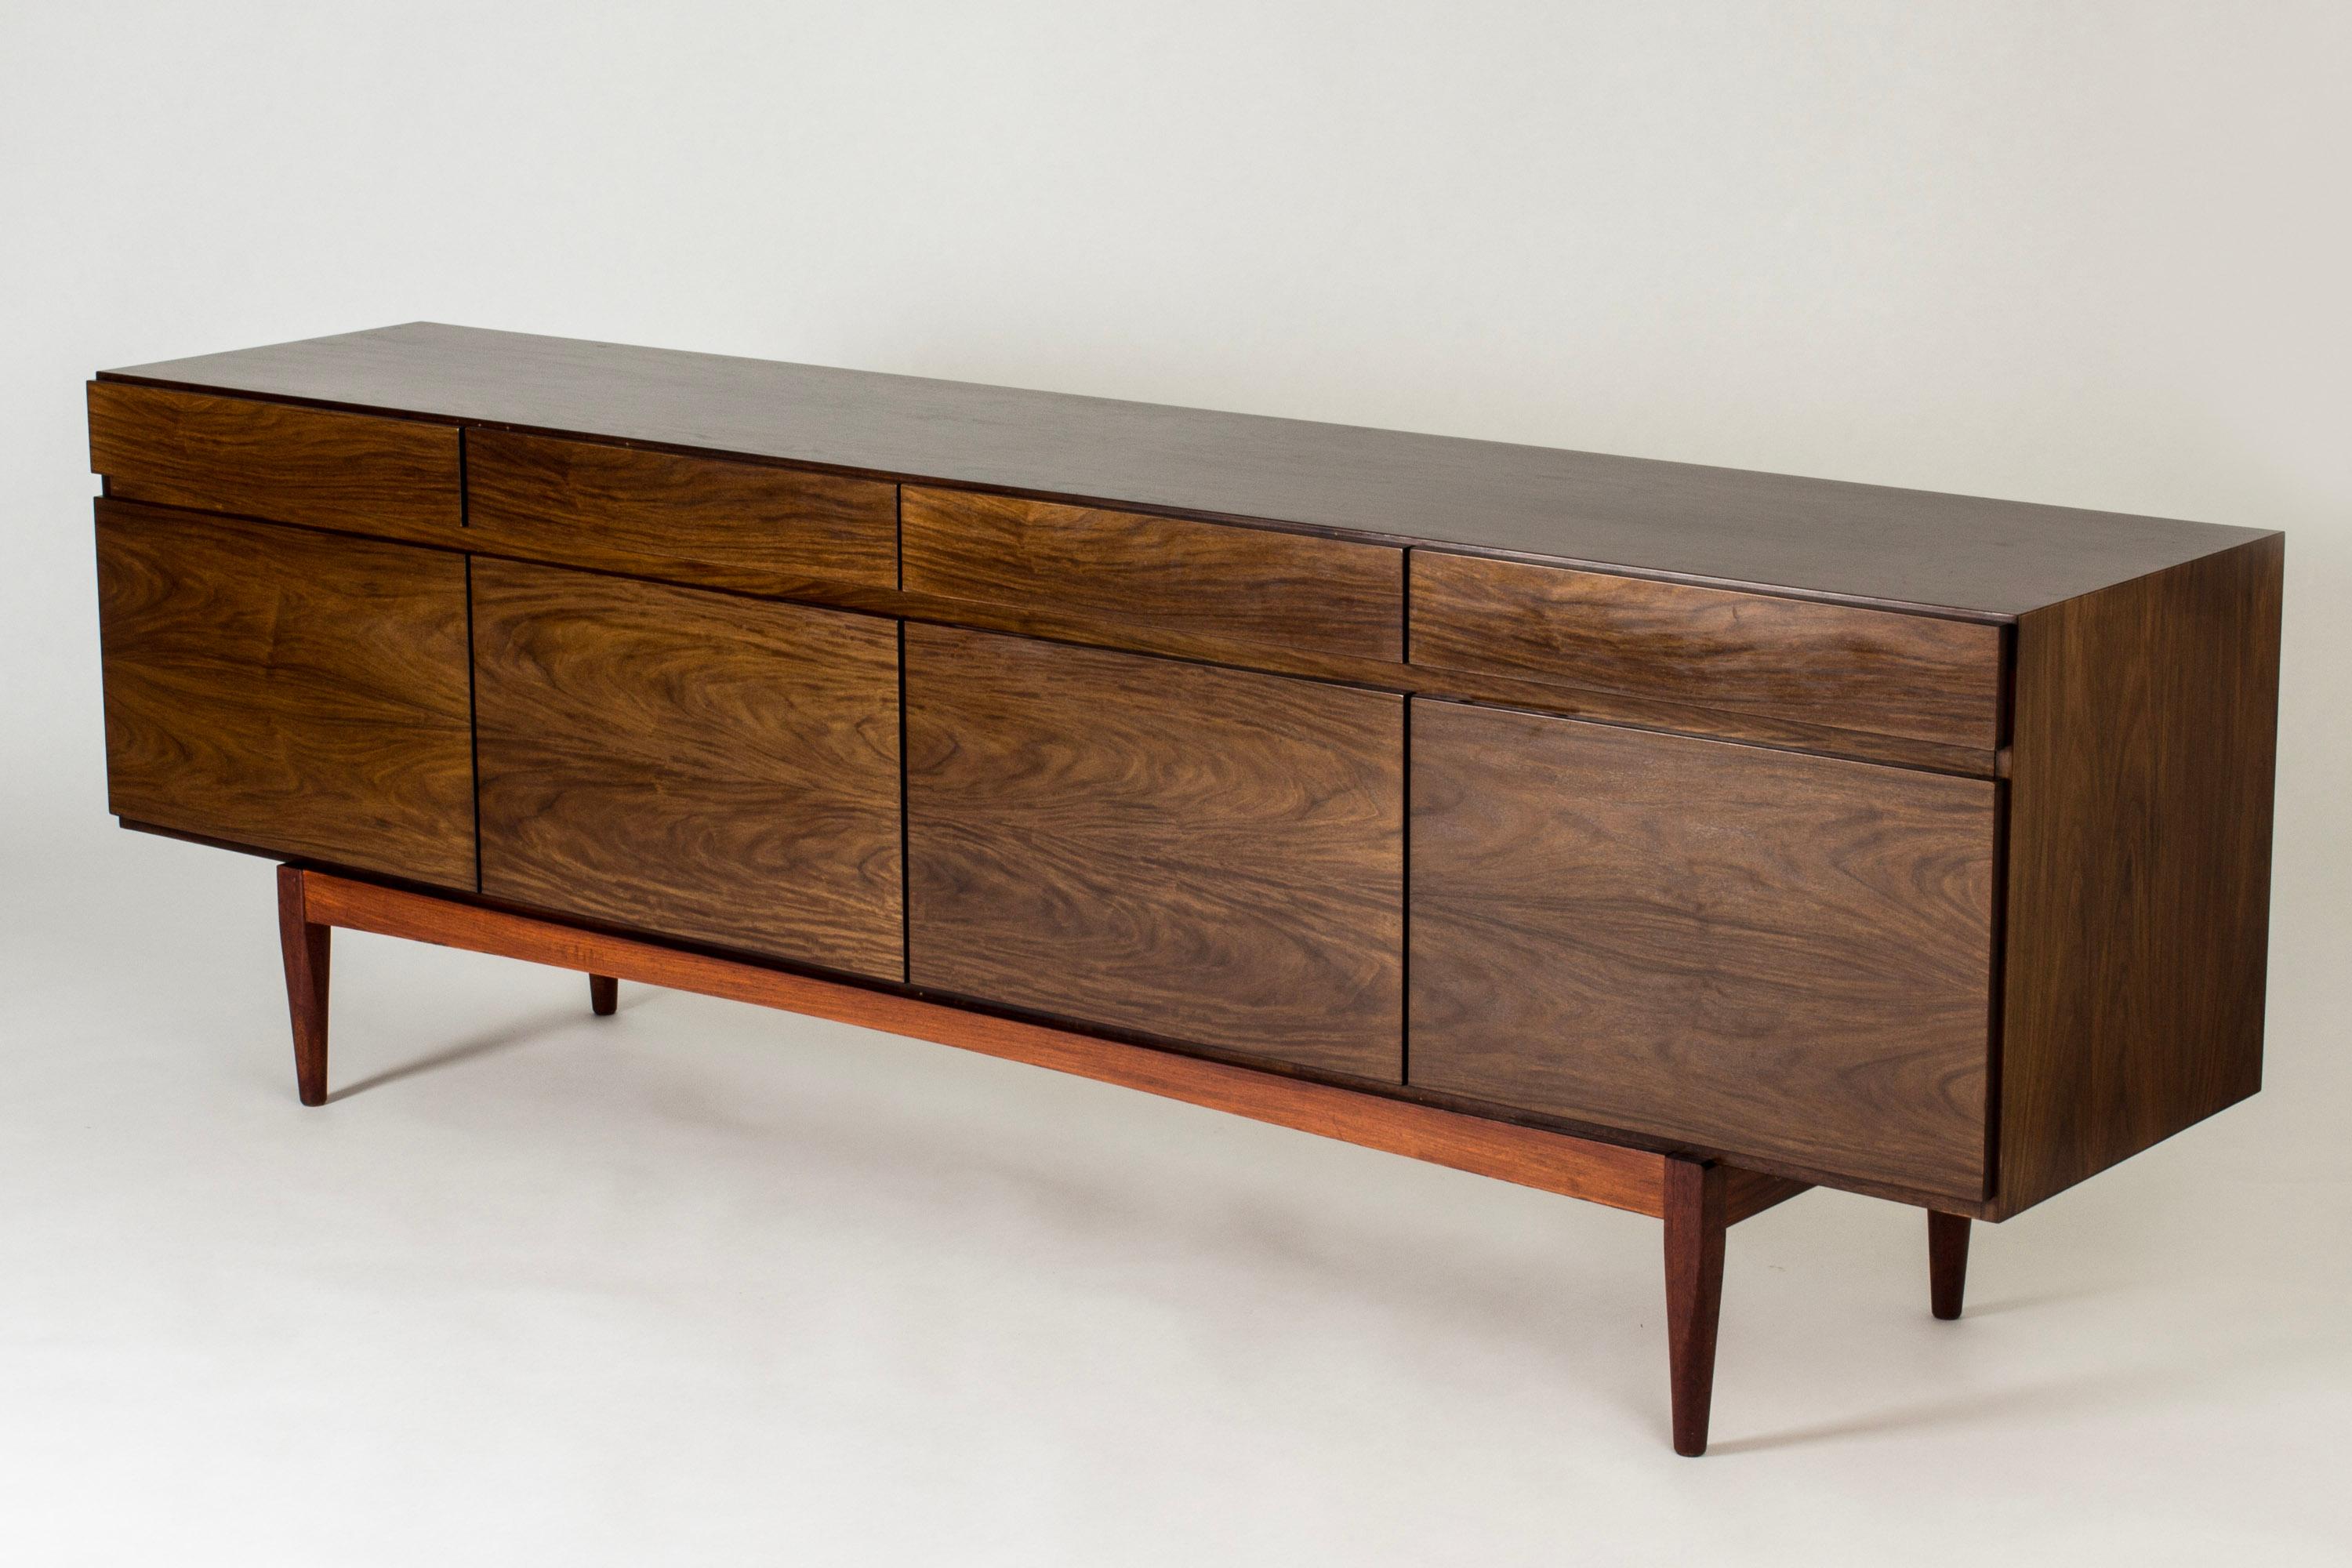 Elegant “FA-66” sideboard by Ib Kofod Larsen, made from rosewood with beautiful woodgrain. Four drawers under the table top, four cabinet doors.